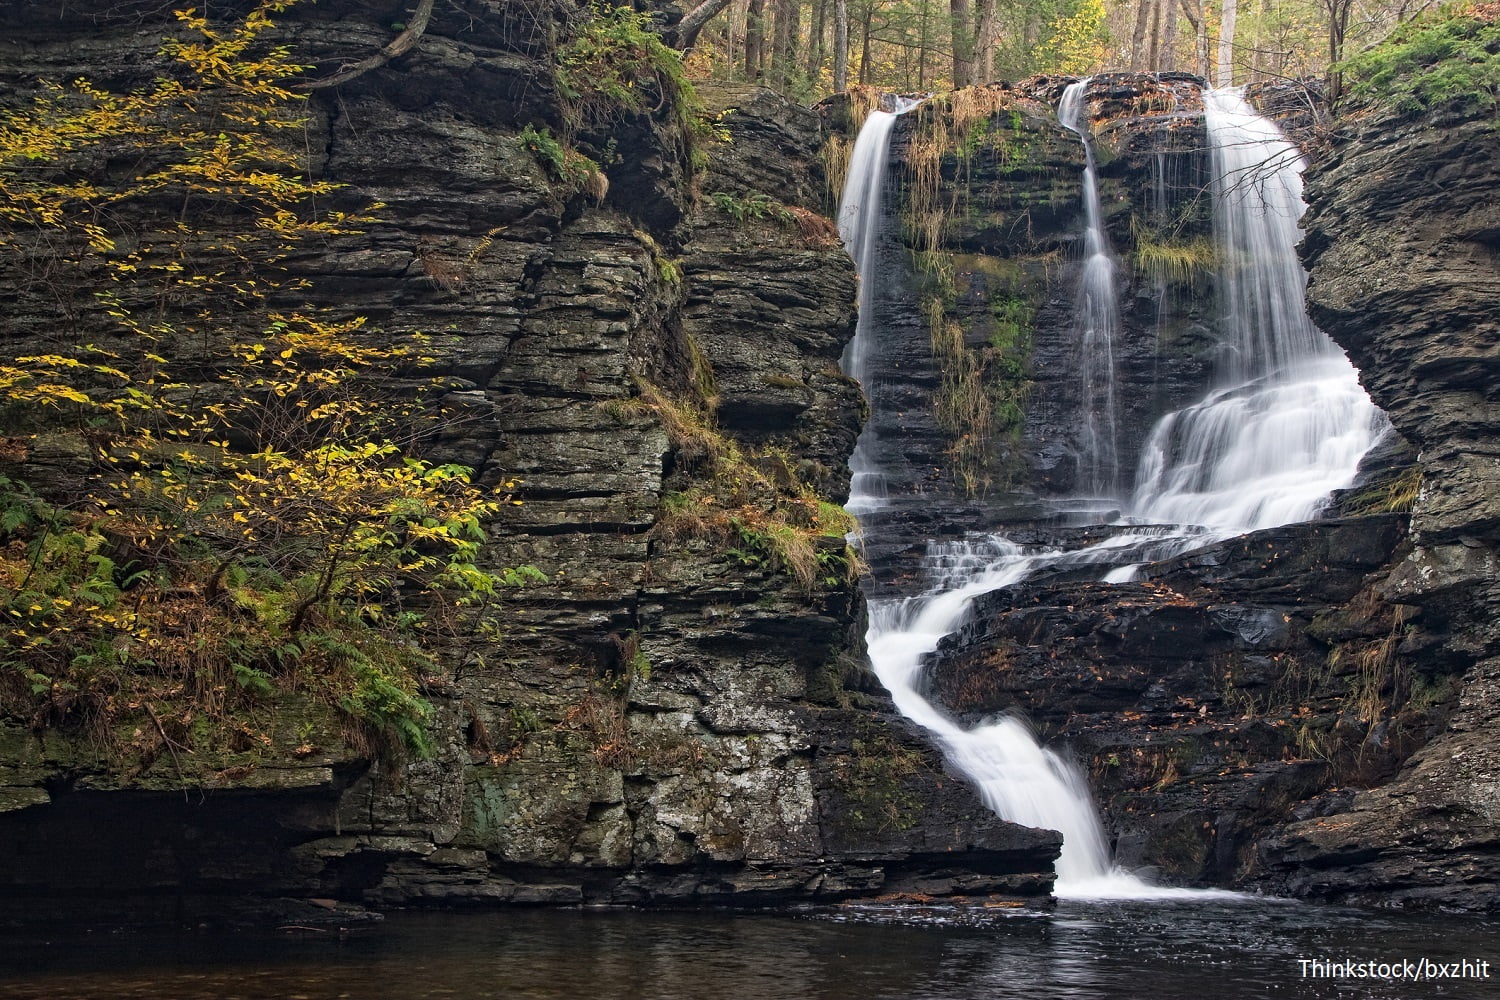 What Is the Best Way to Experience Bushkill Falls Hiking Trails?